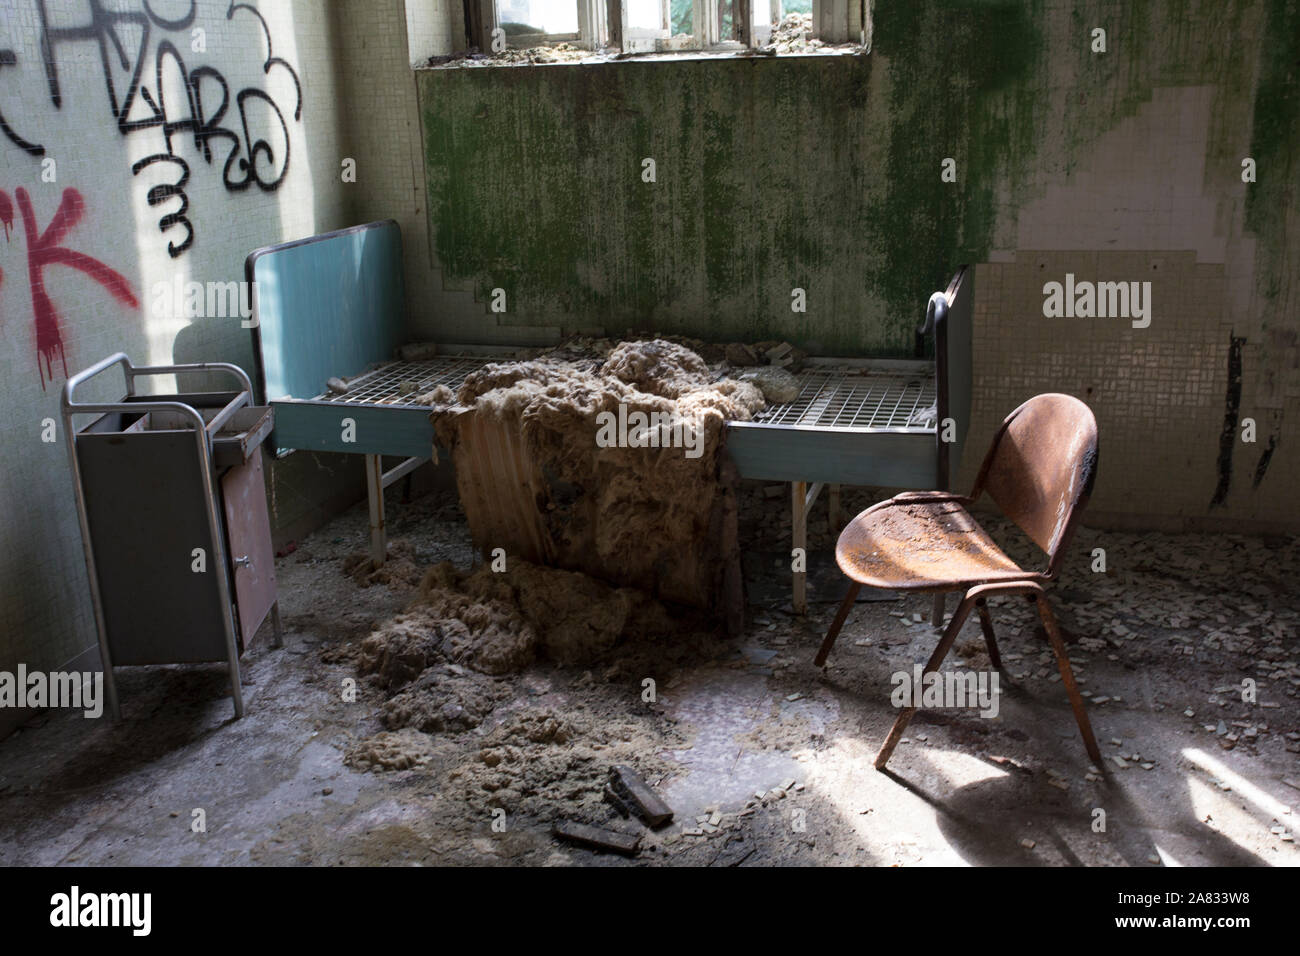 Limbiate, Italy - September 27, 2015: Abandoned Hospital Building called Mombello. The building was abandoned nearly twenty years ago, but never demol Stock Photo